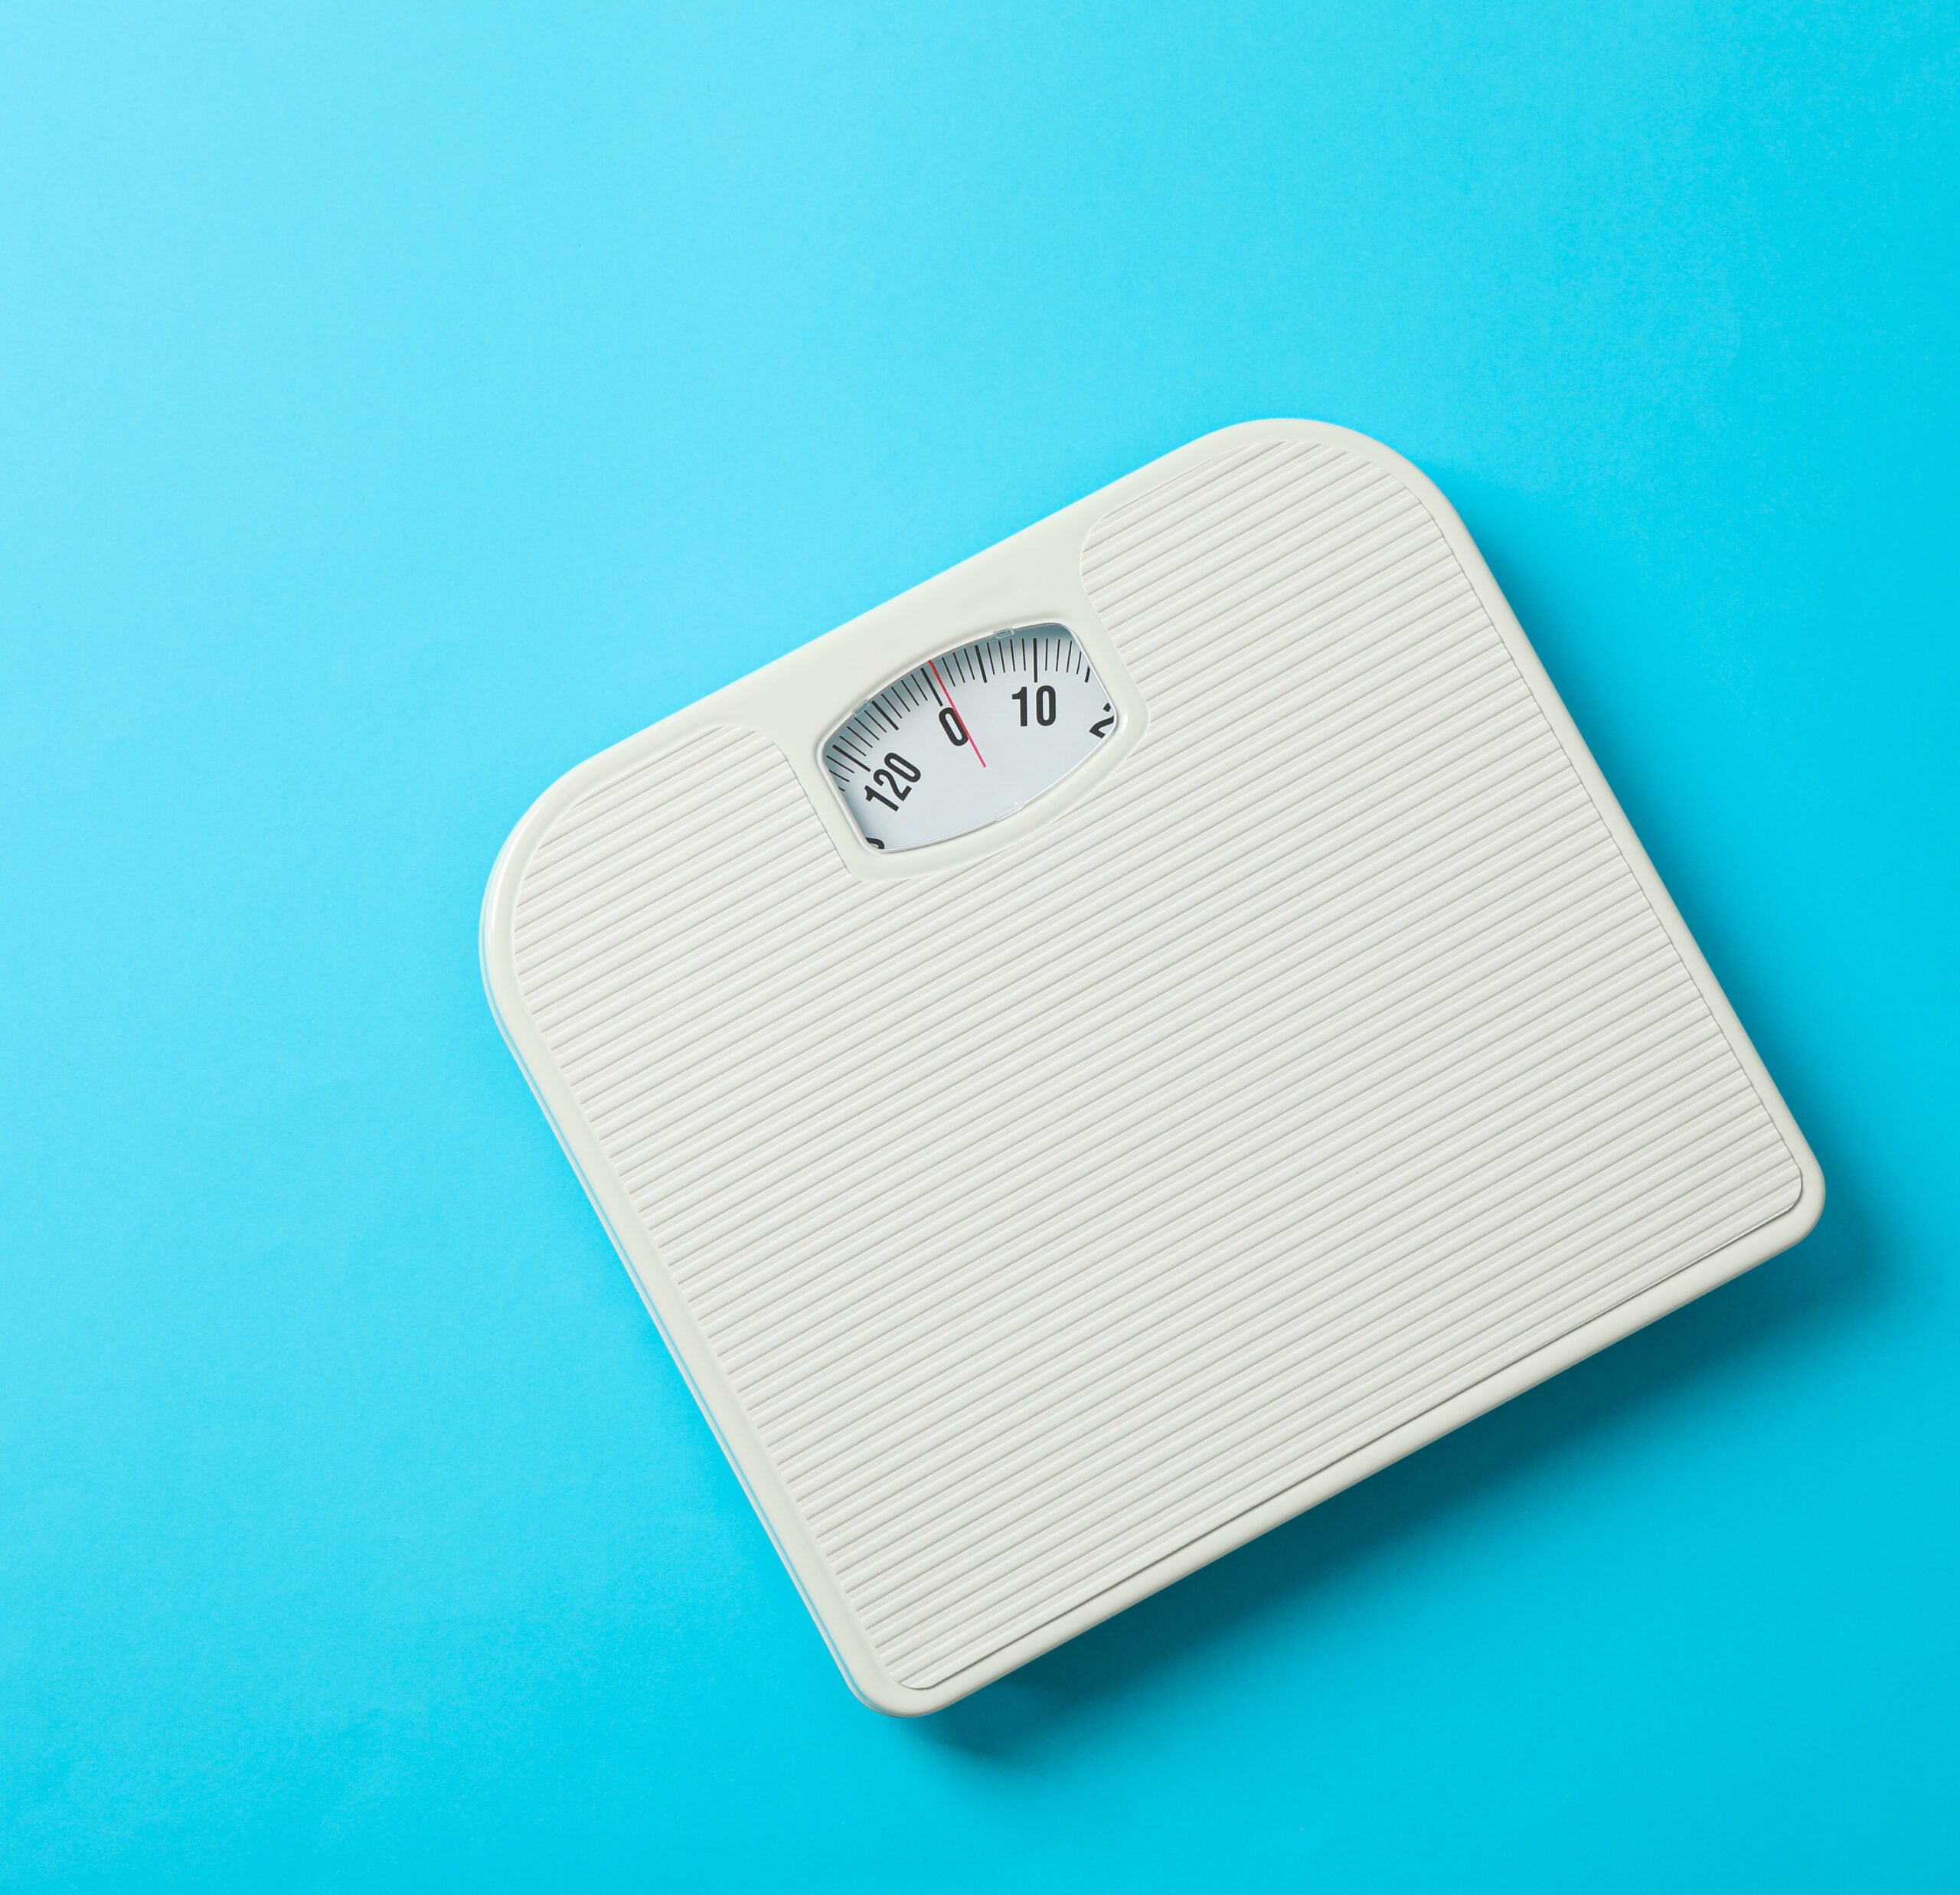 body weight scale on a blue plain background